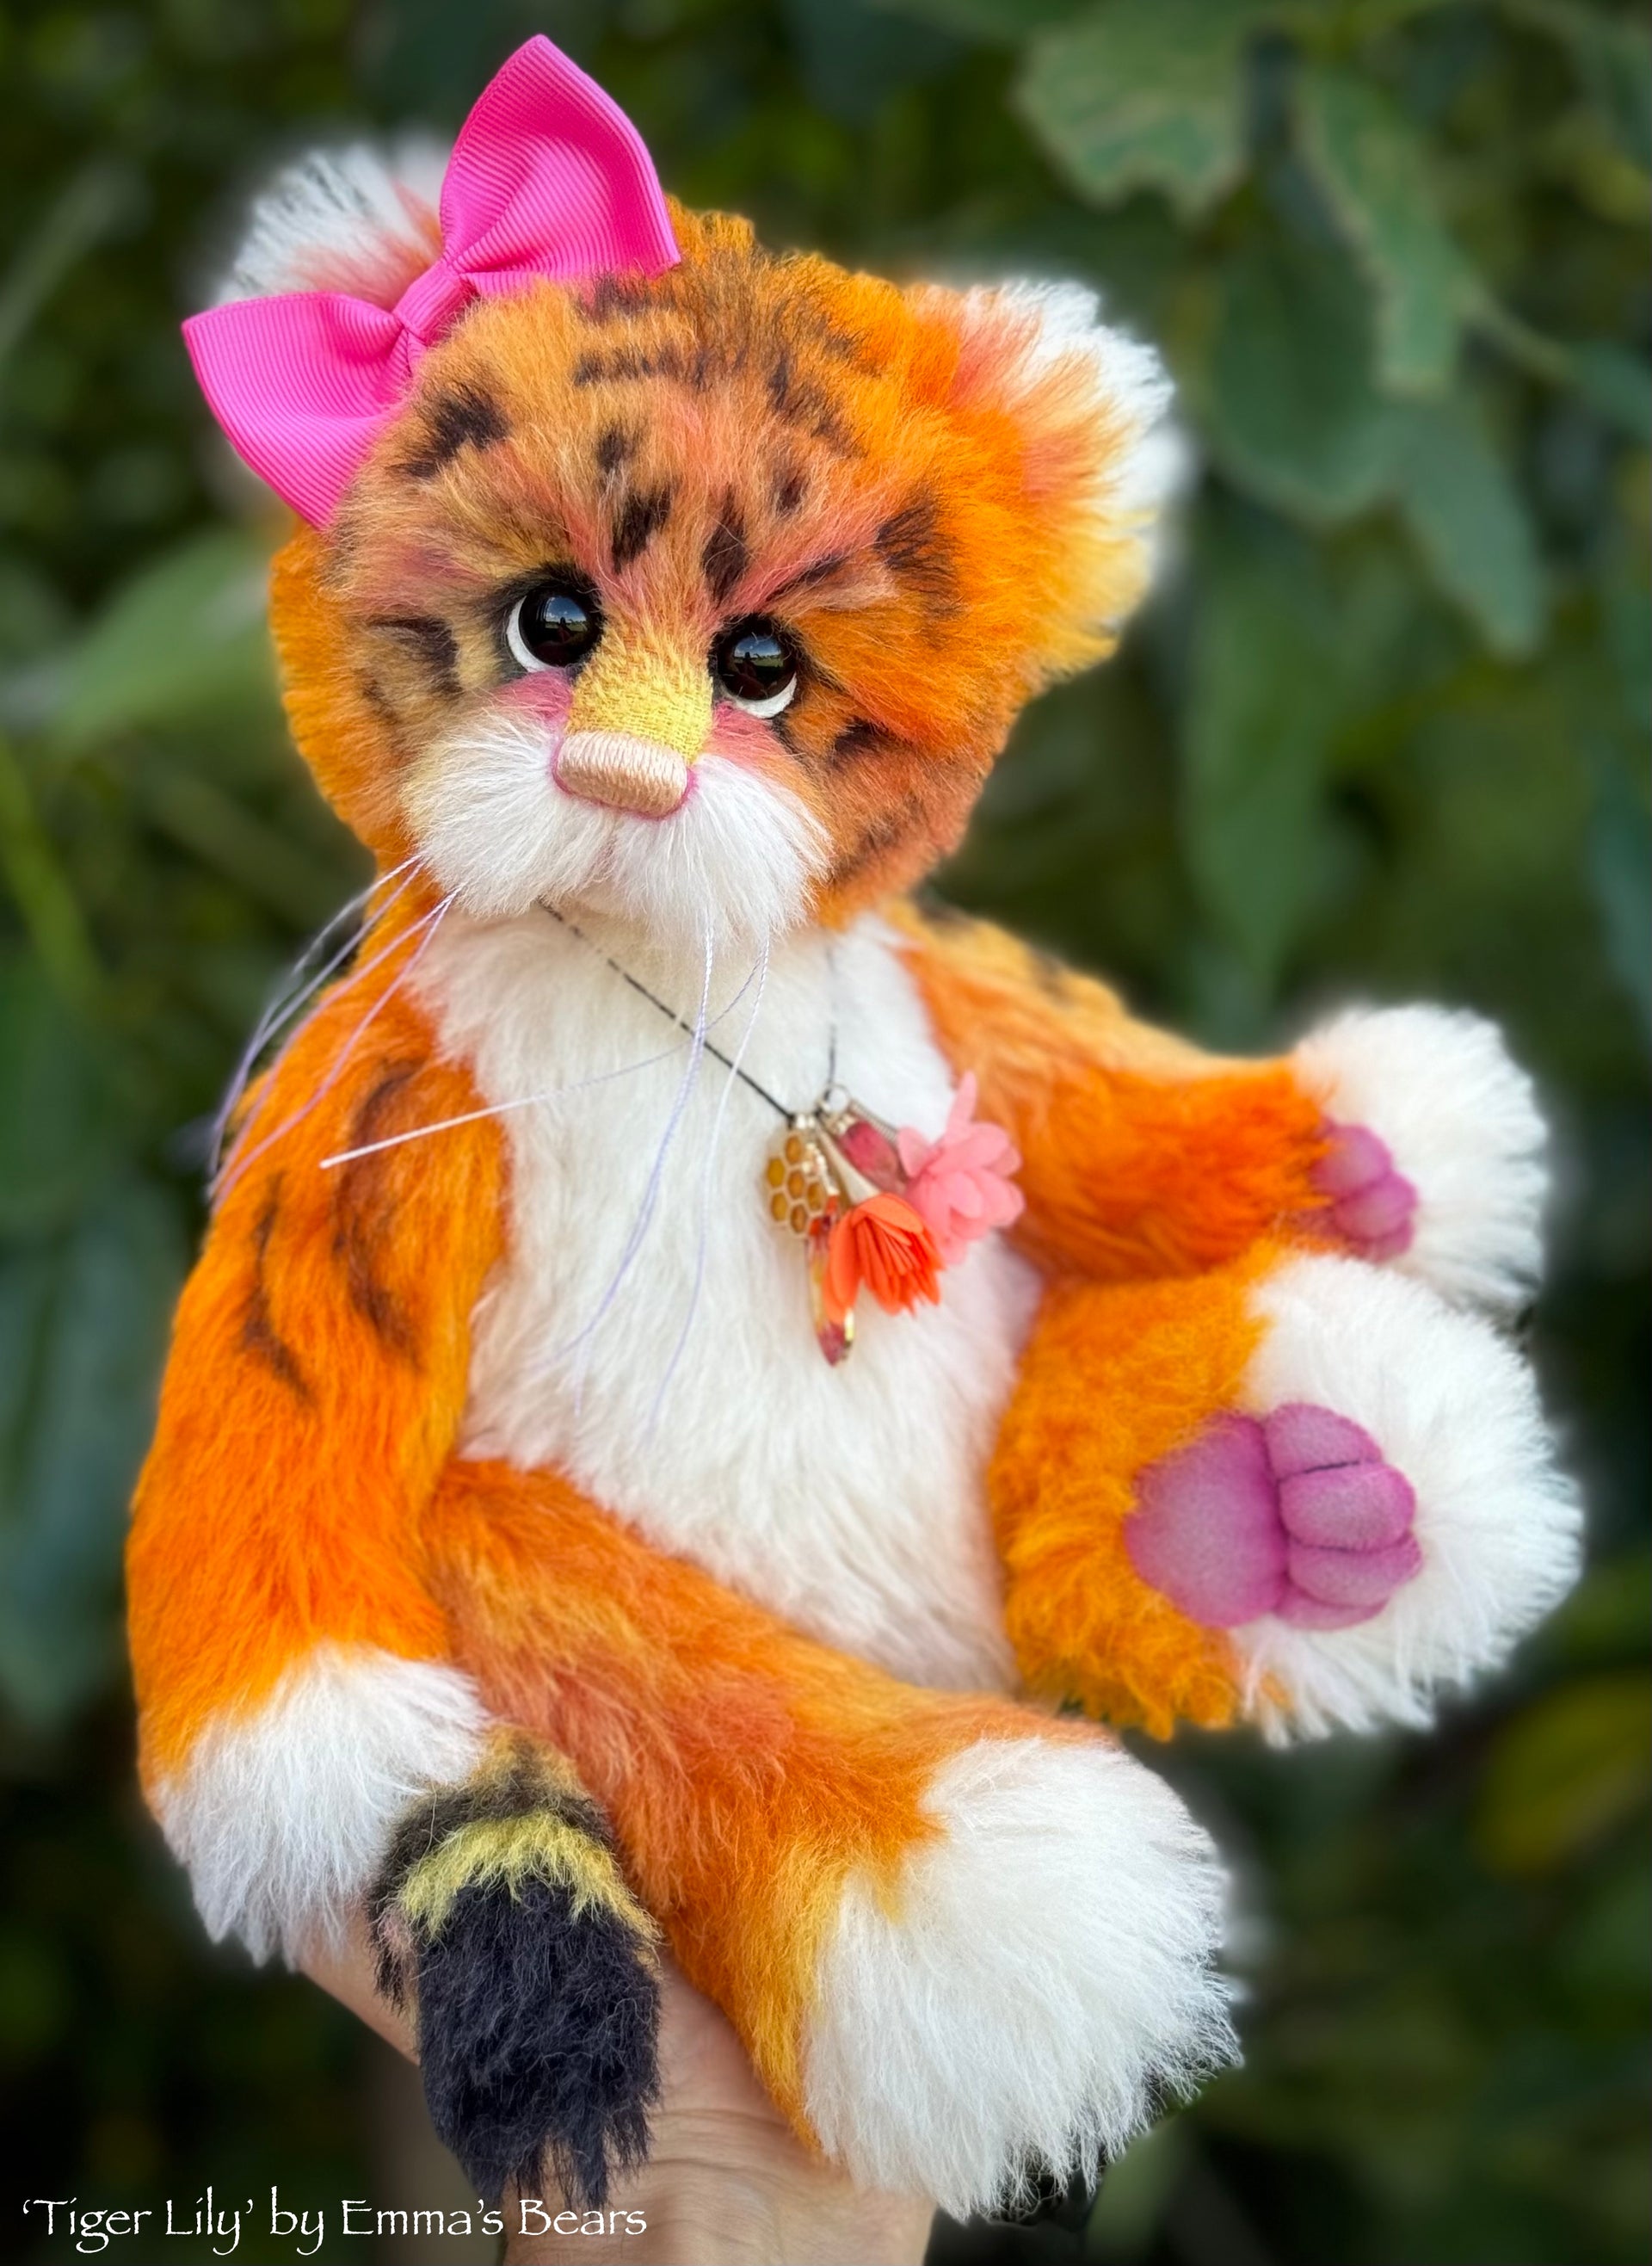 Tiger Lily - 12" Hand-dyed alpaca artist Tiger Teddy by Emma's Bears - OOAK